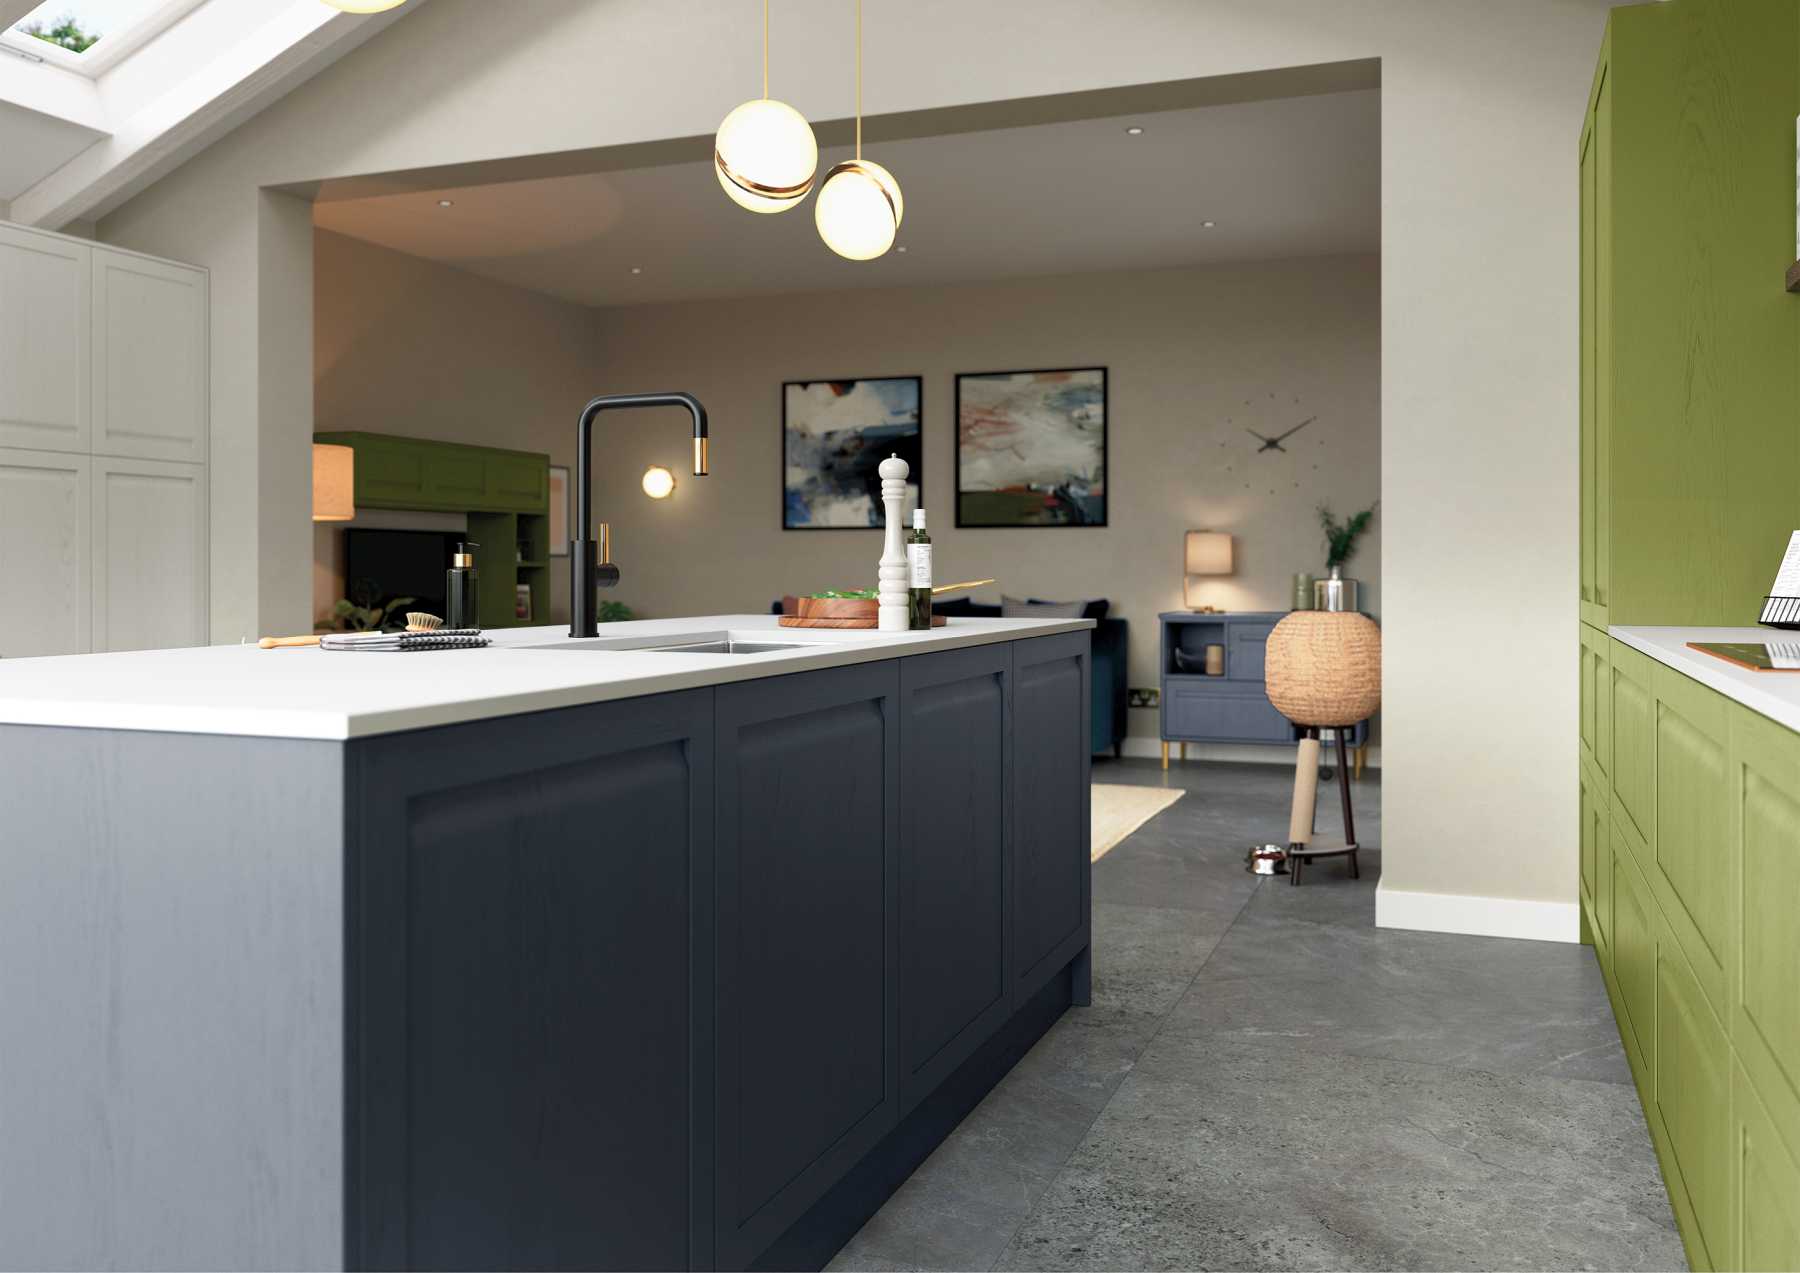 Handleless Shaker-Style Kitchen Painted Slate Blue and Citrus Green featuring island unit and pendant lighting 